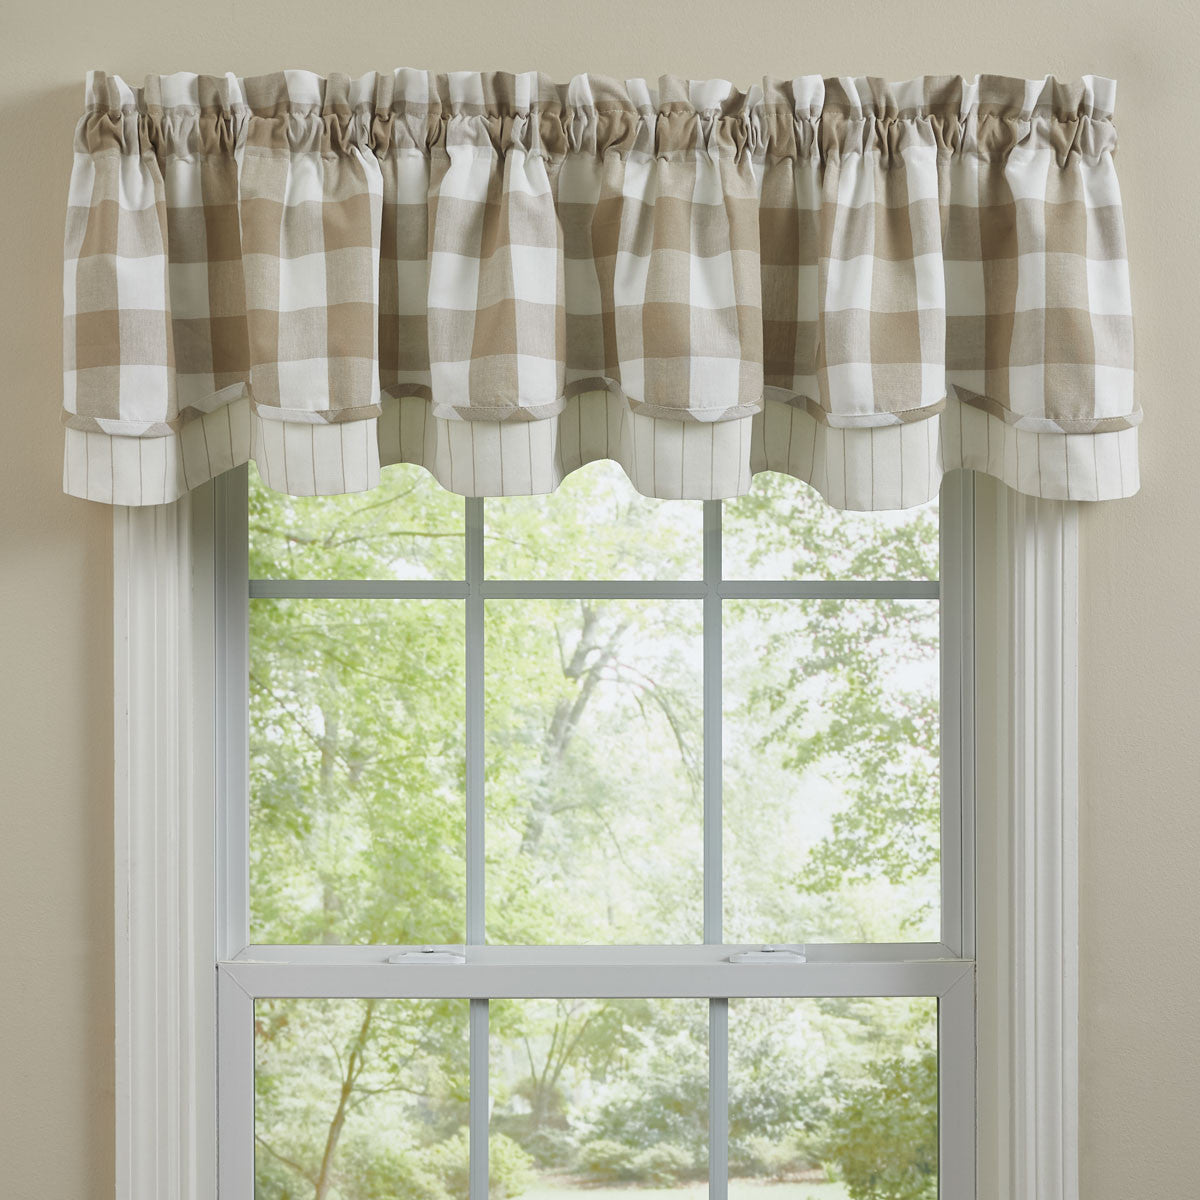 WICKLOW CHECK LINED LAYERED VALANCE 72X16 - NATURAL